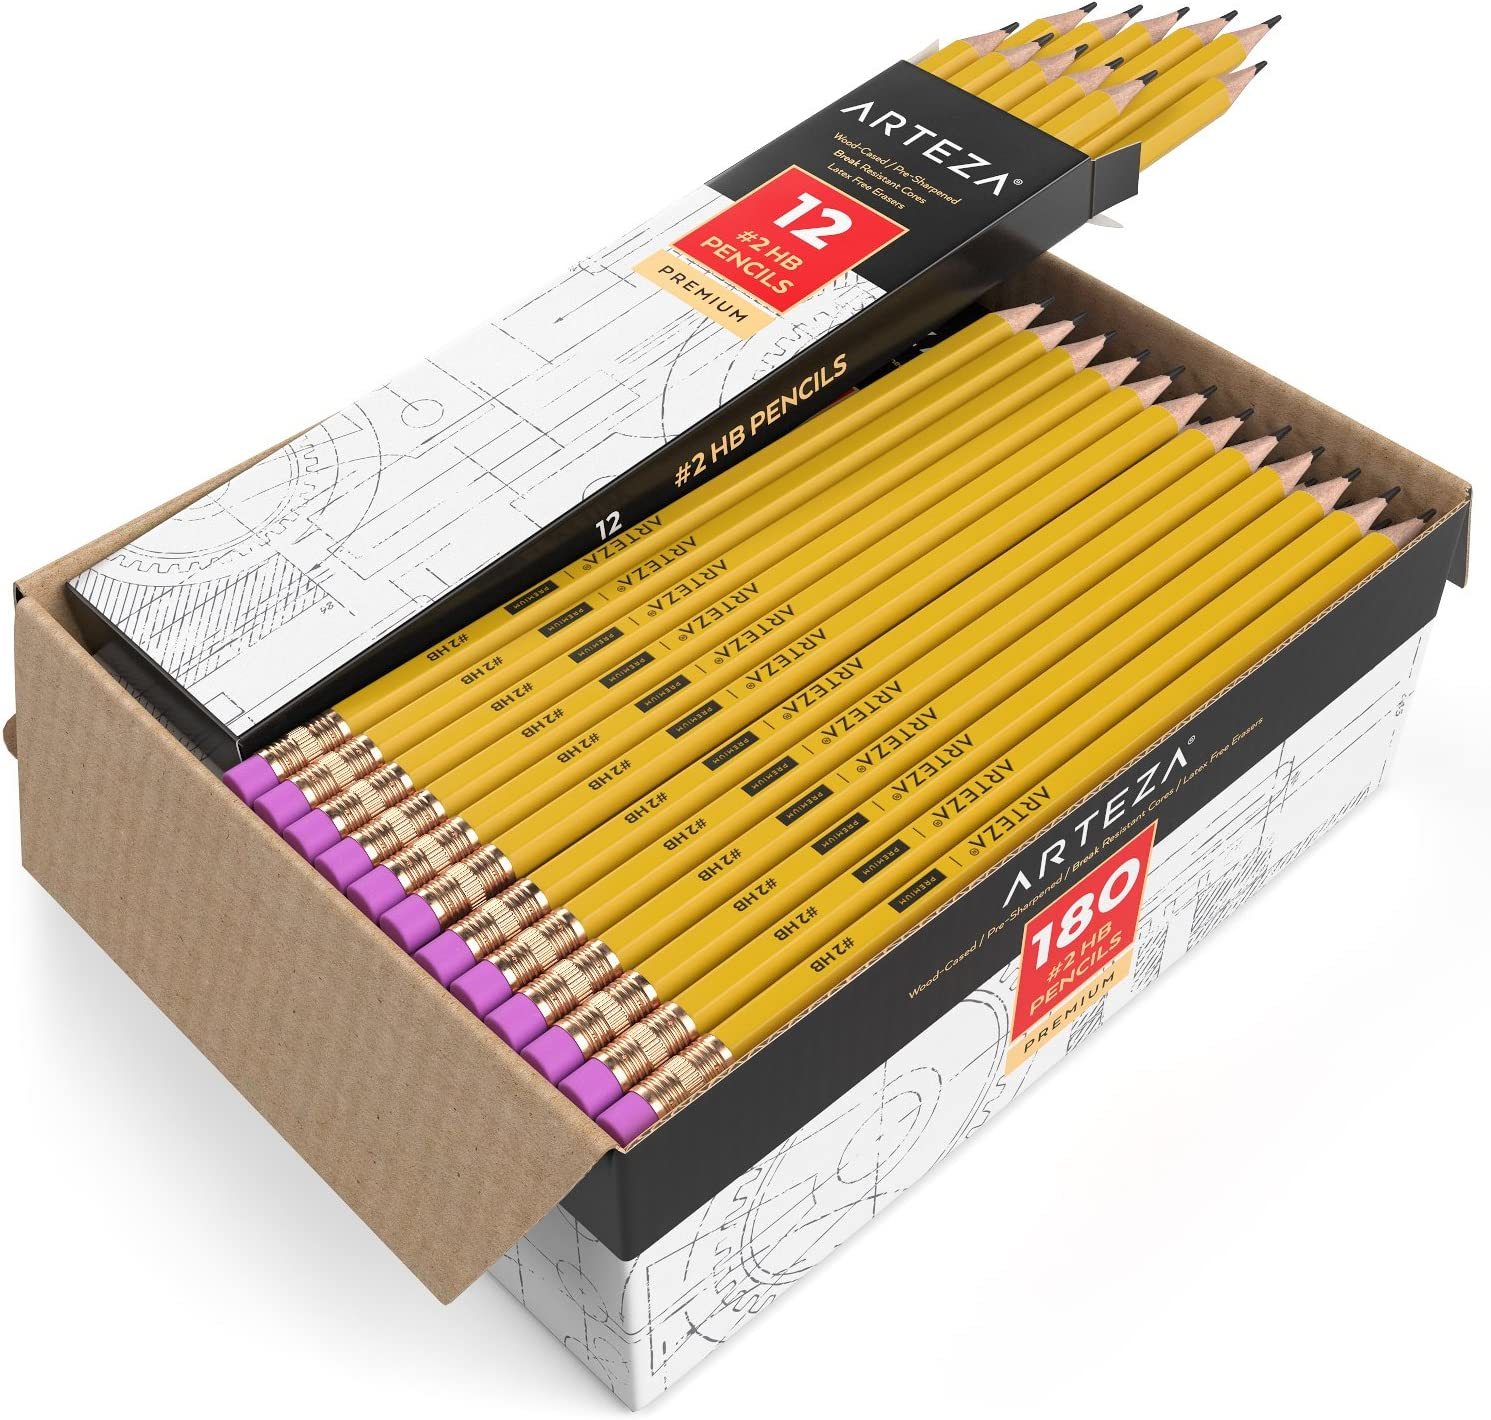 Artline 5109A Extra Thick Whiteboard Pens - Pack 4